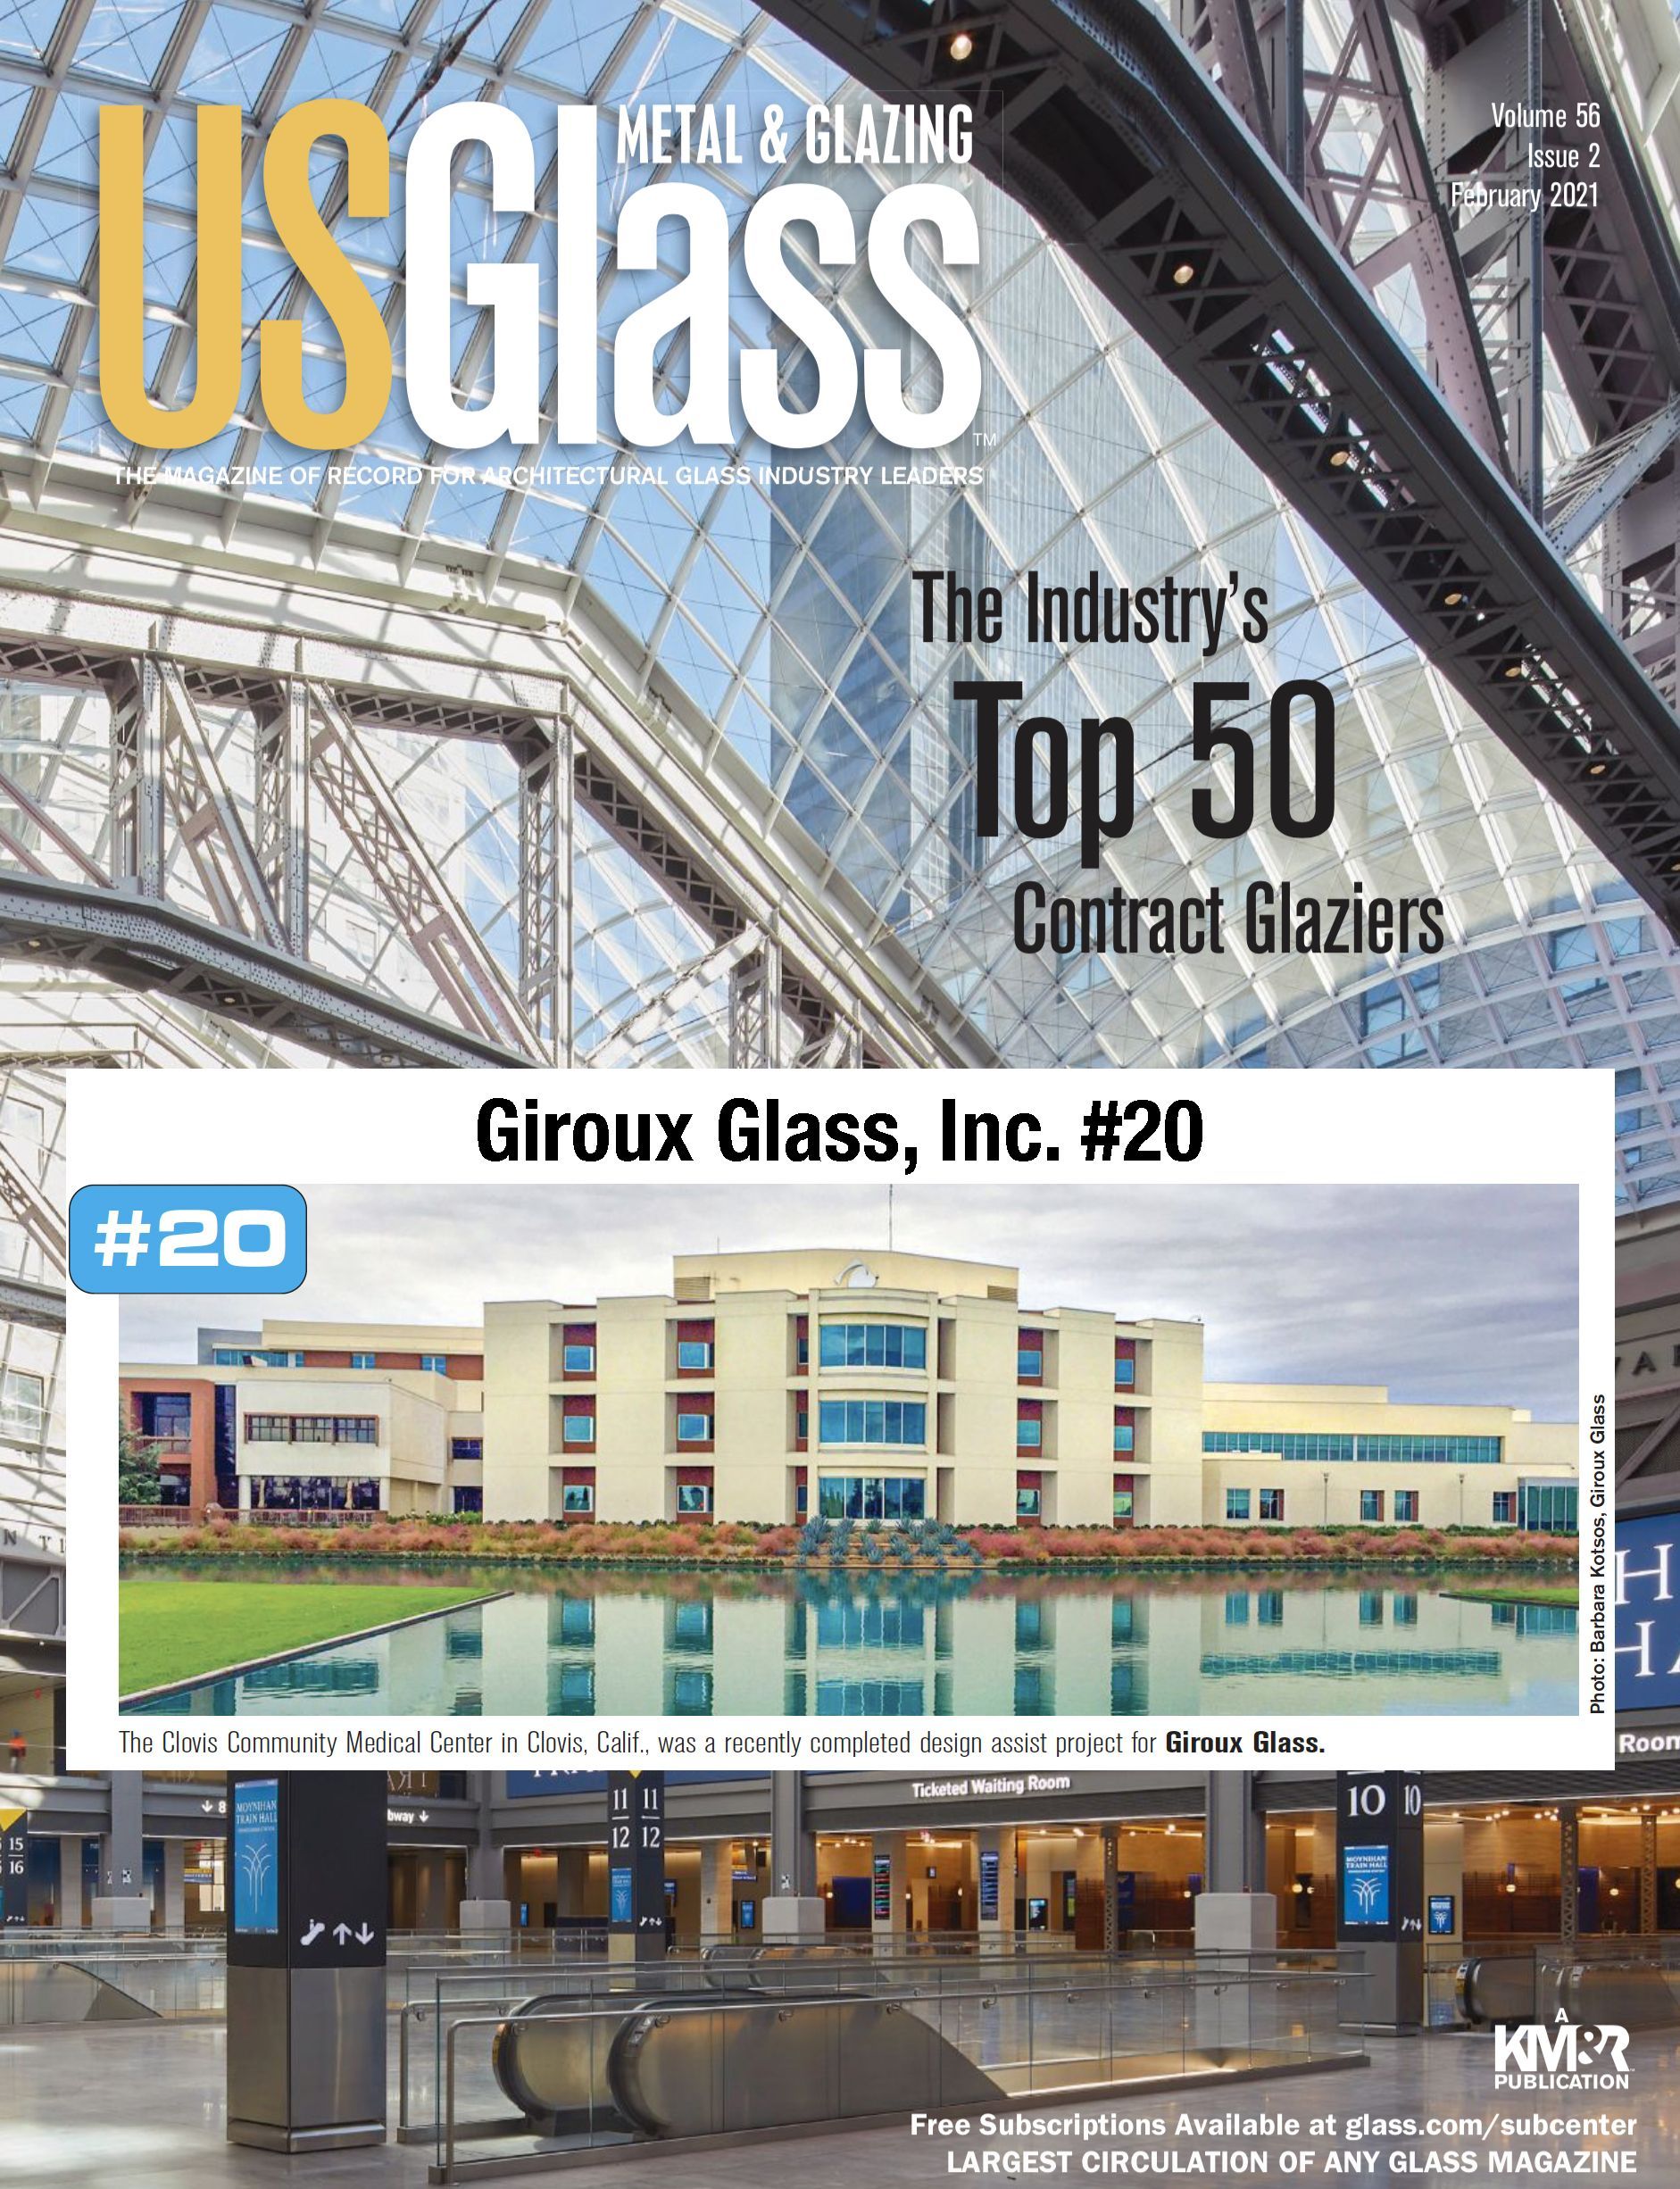 US Glass Magazine’s Annual Top 50 Contract Glaziers 2020 – Giroux Glass Ranked #20